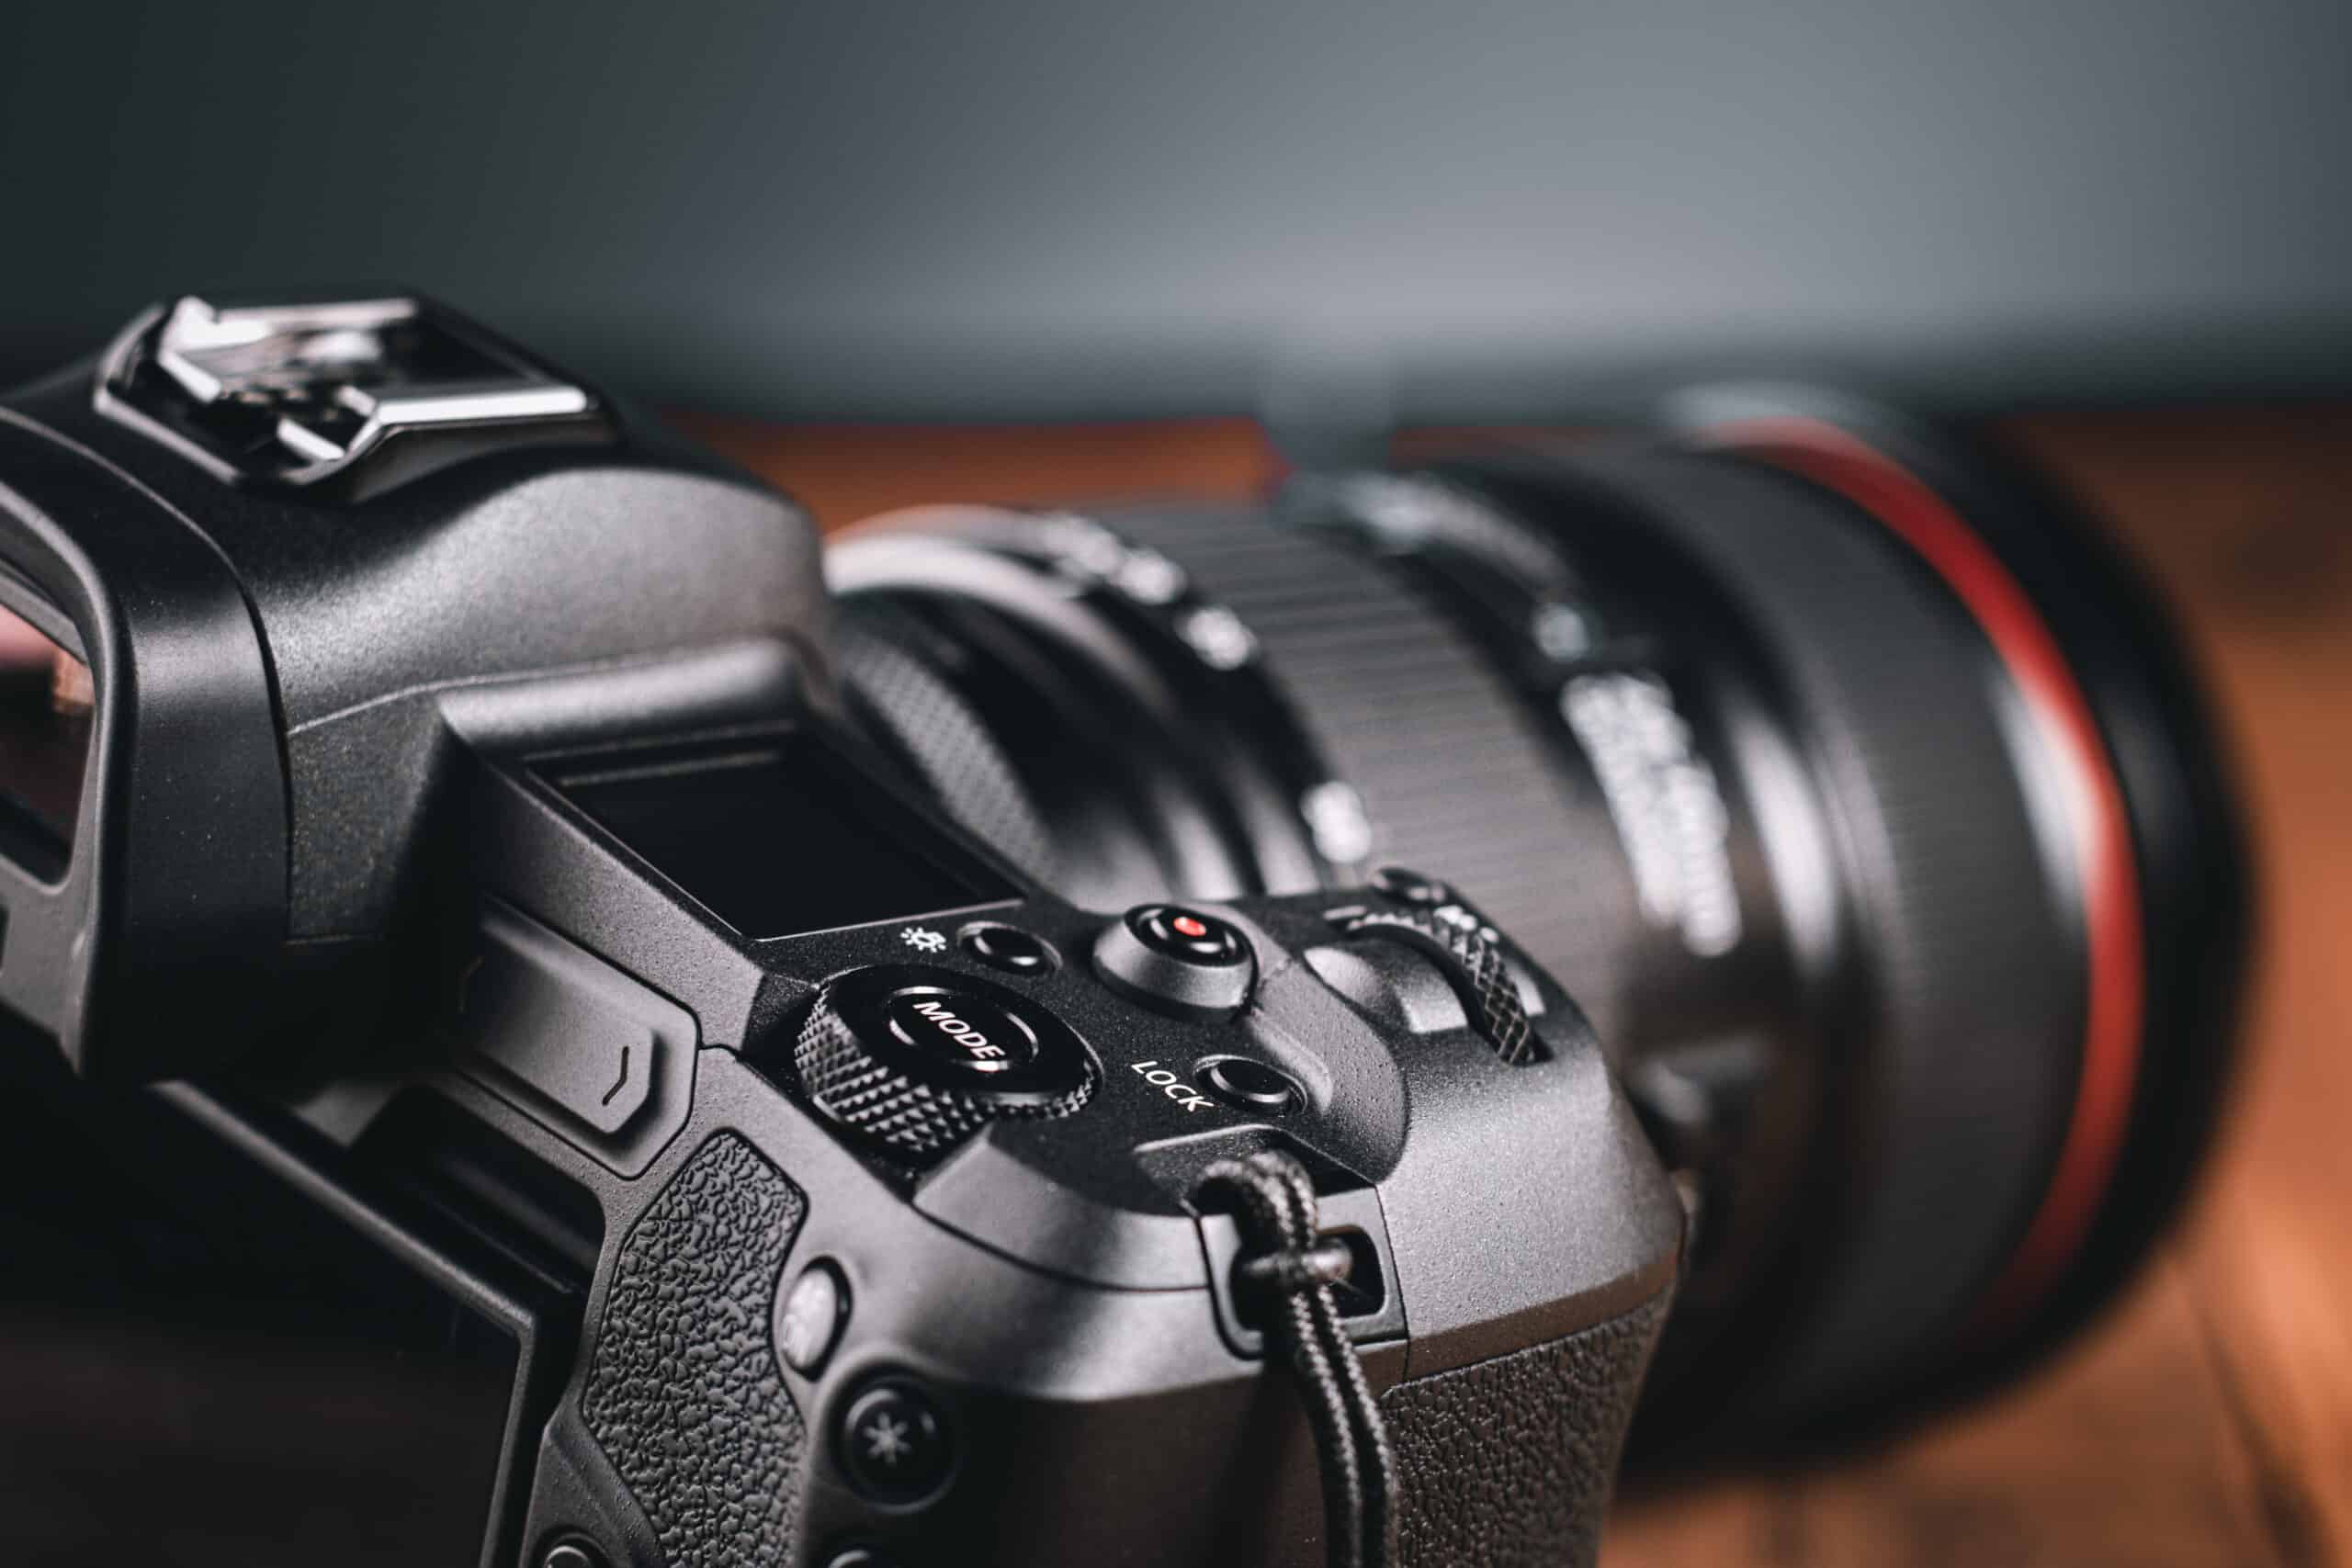 CANON CAMERA AND PHOTOGRAPHY TIPS - USING LIVE VIEW for beginners. 